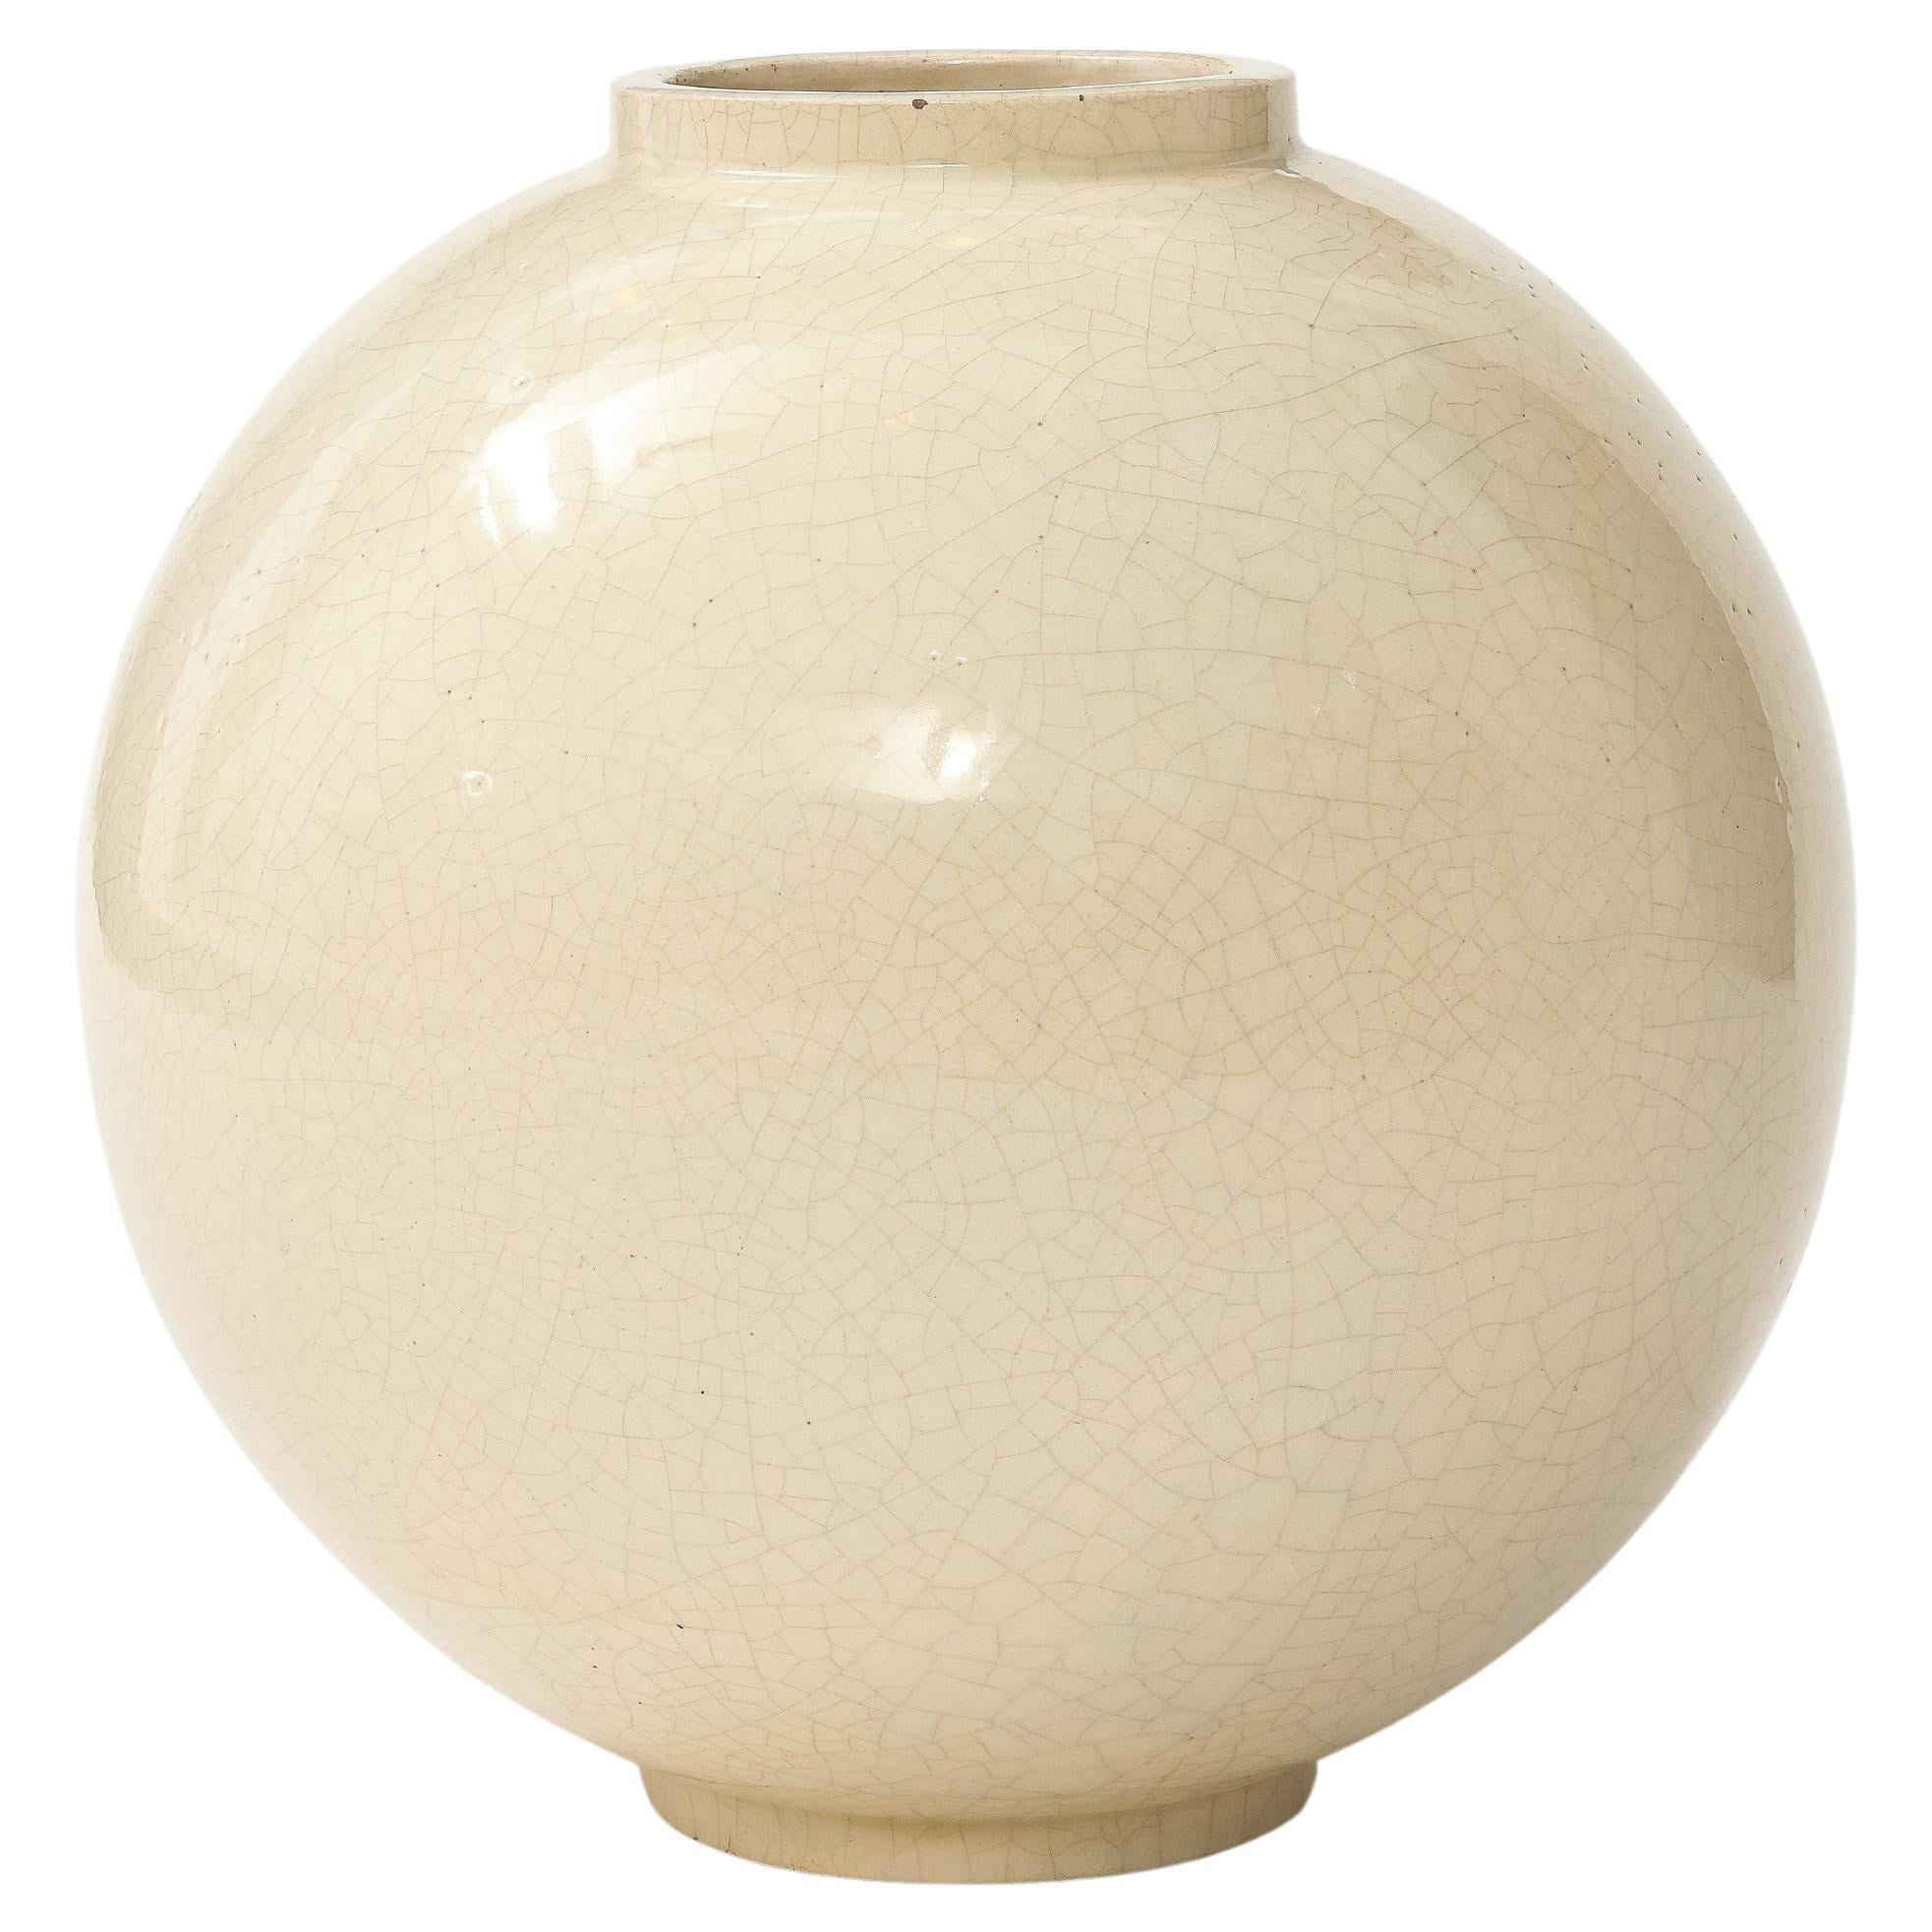 Sphere Shaped Vase with off White Cracquelure Glaze, France, circa 1930, Signed